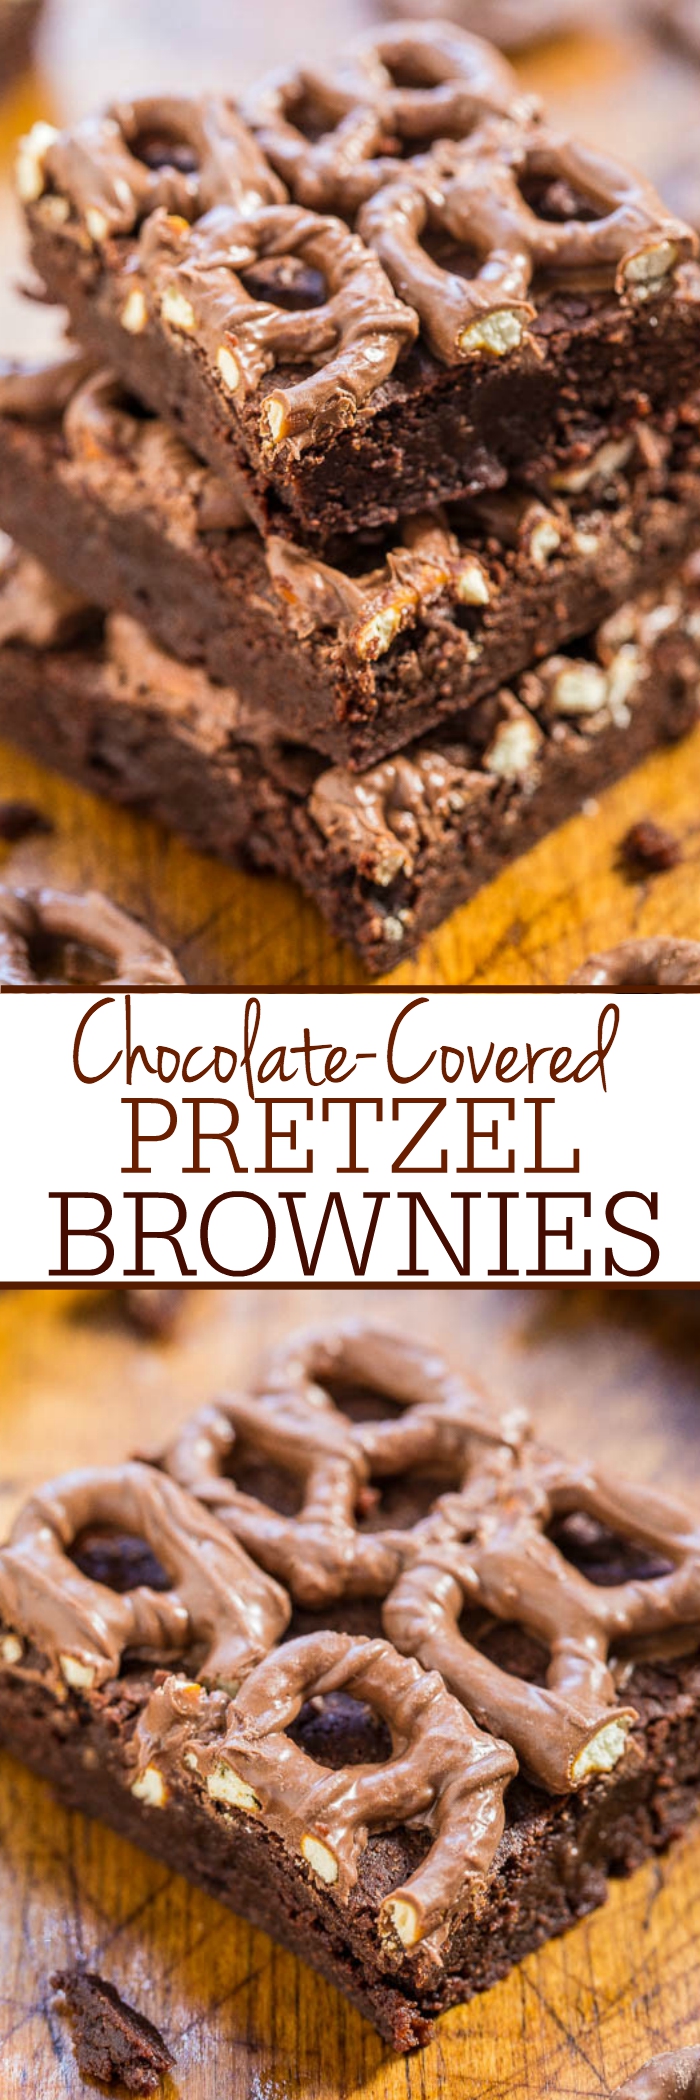 Chocolate-Covered Pretzel Brownies - Fudgy, not at all cakey, so easy, and topped with chocolate-covered pretzels!! Salty-and-sweet treats always hit the spot and these are just irresistible!!